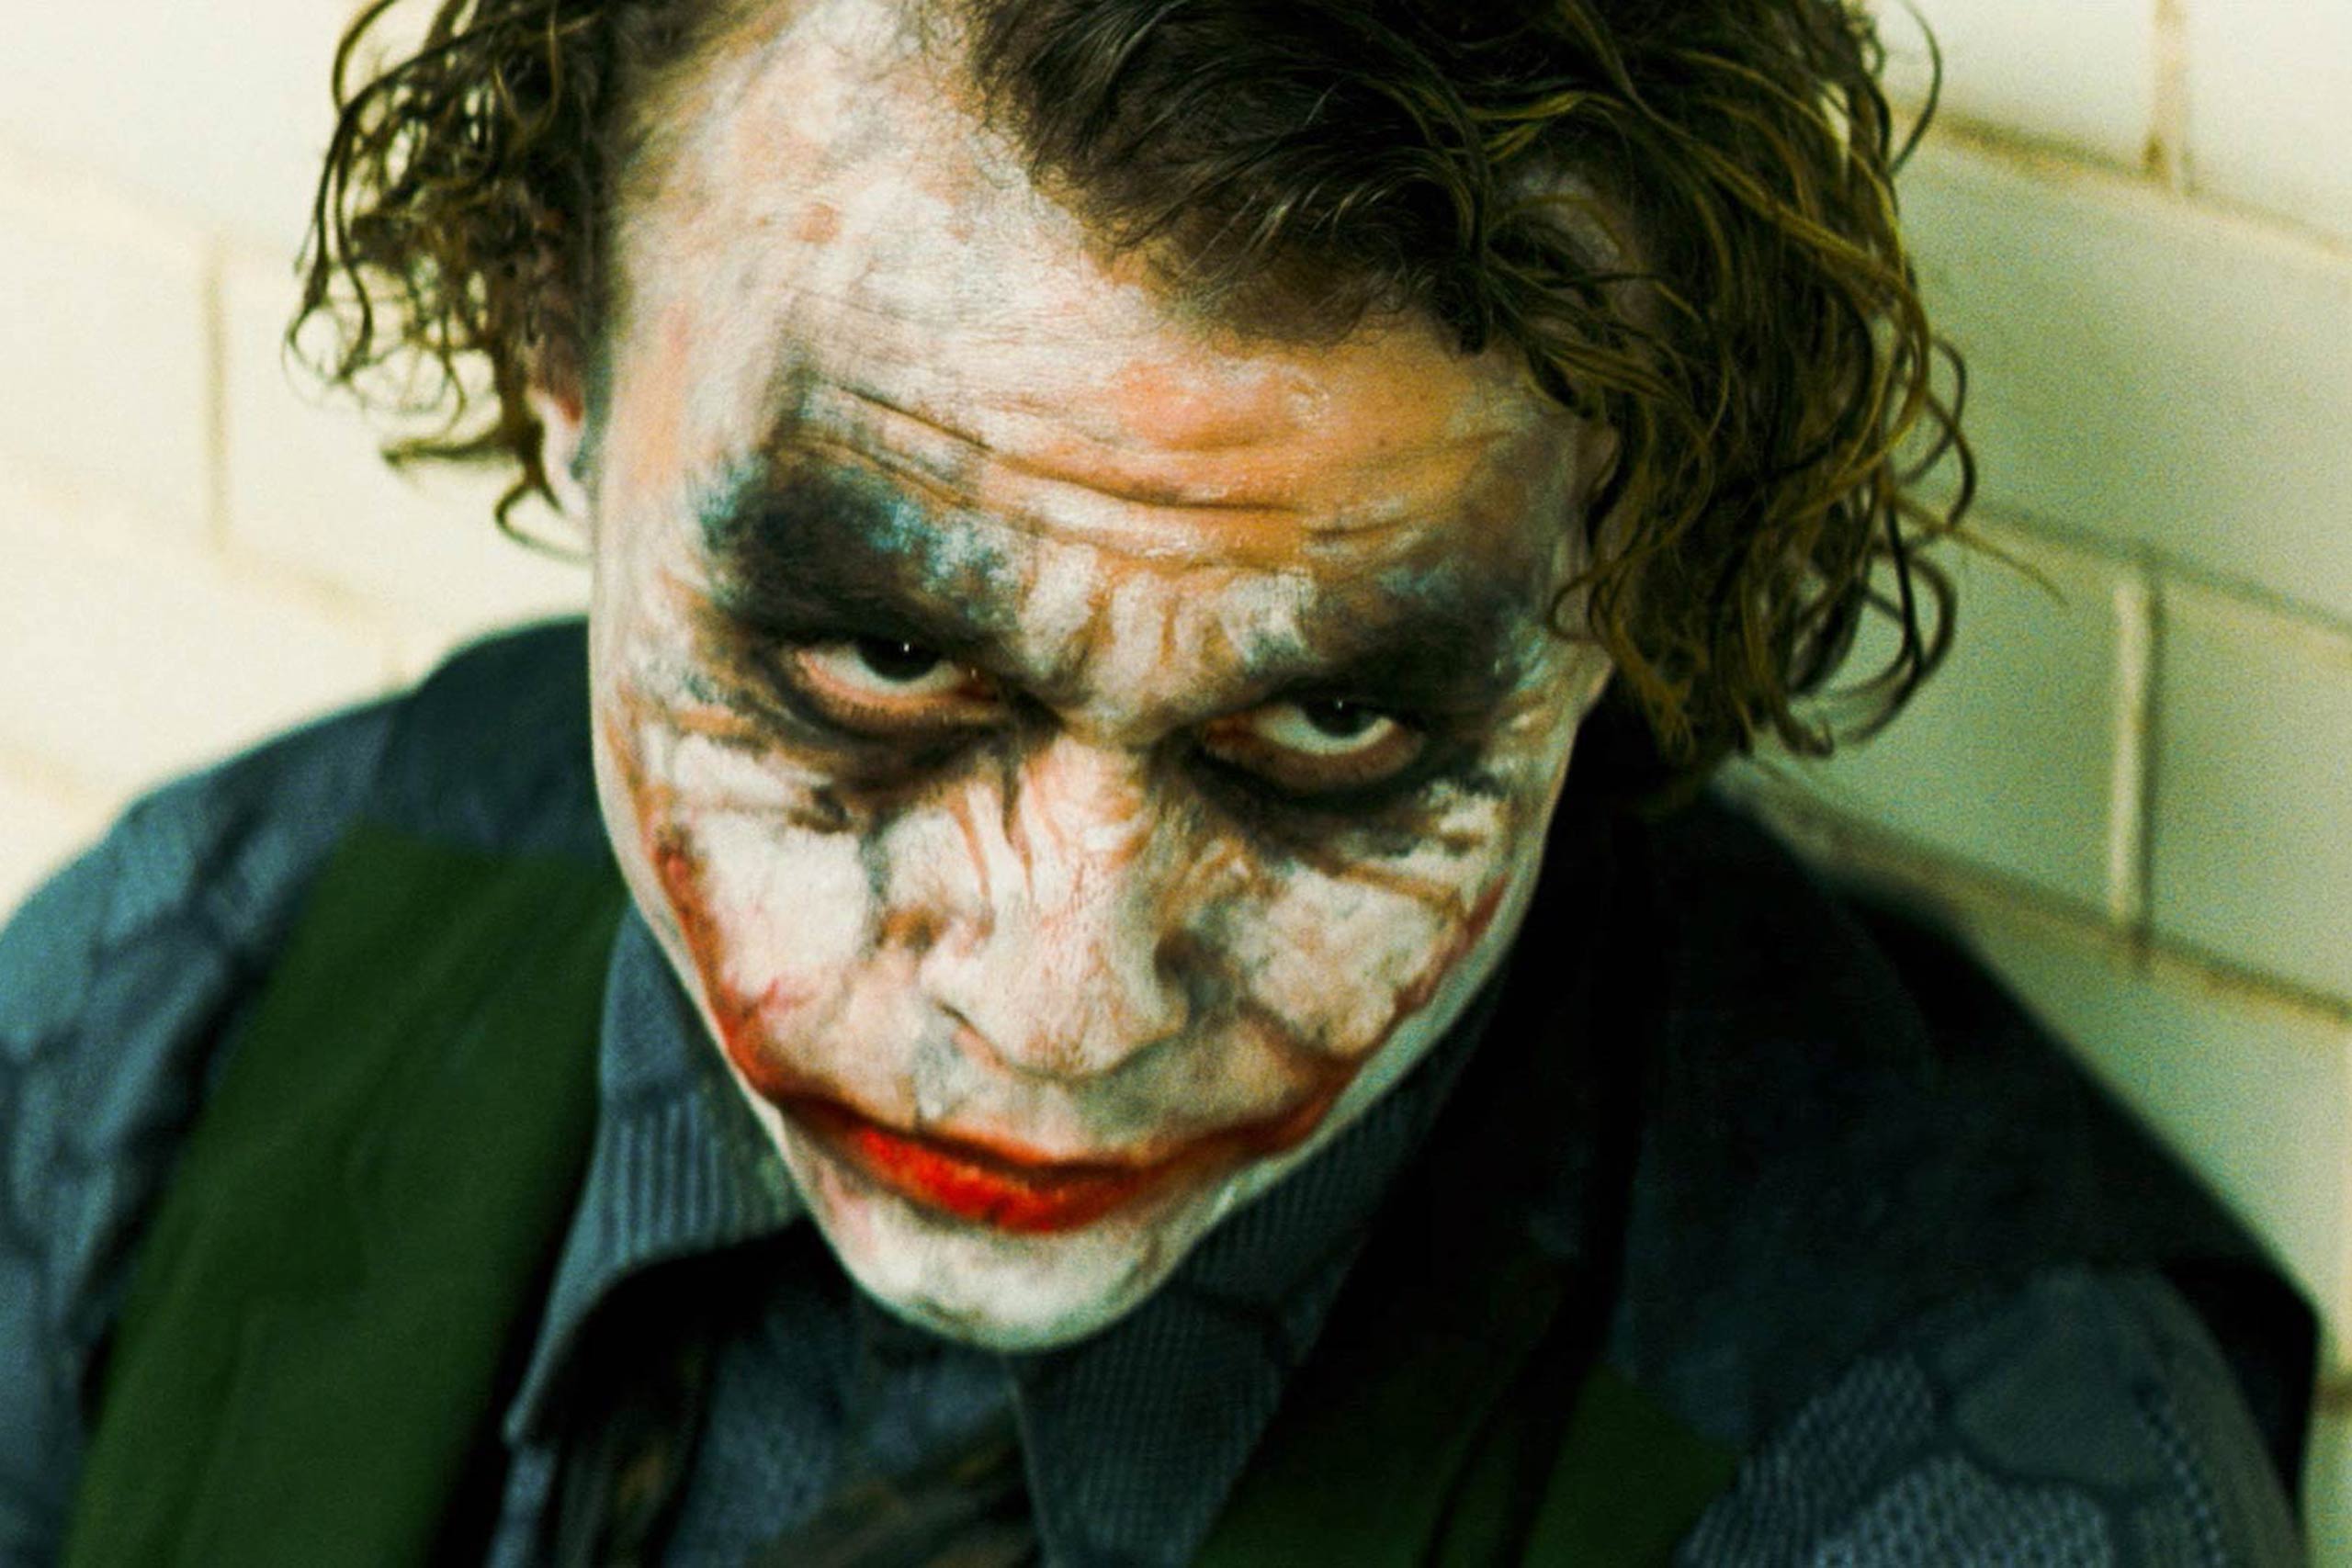 <strong><i>The Dark Knight</i></strong> In Christopher Nolan’s 2008 sequel to <i>Batman Begins</i>, Christian Bale returns as Batman, this time joined by Heath Ledger as the ultra-creepy villain known as The Joker. (Warner Bros.)